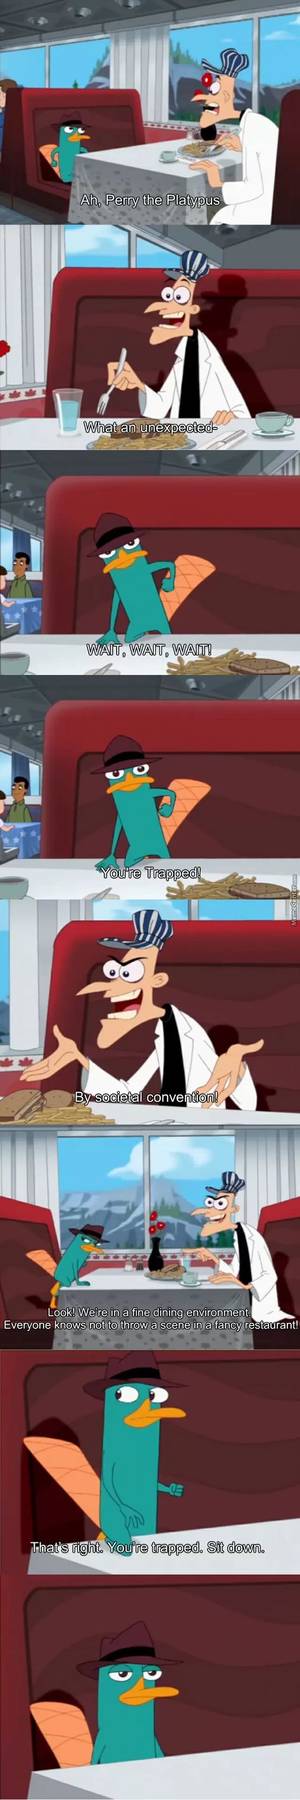 Baljeet Fucks Candace - 205 best Phineas and Ferb images on Pinterest | Pin up cartoons, Disney  stuff and Cartoon